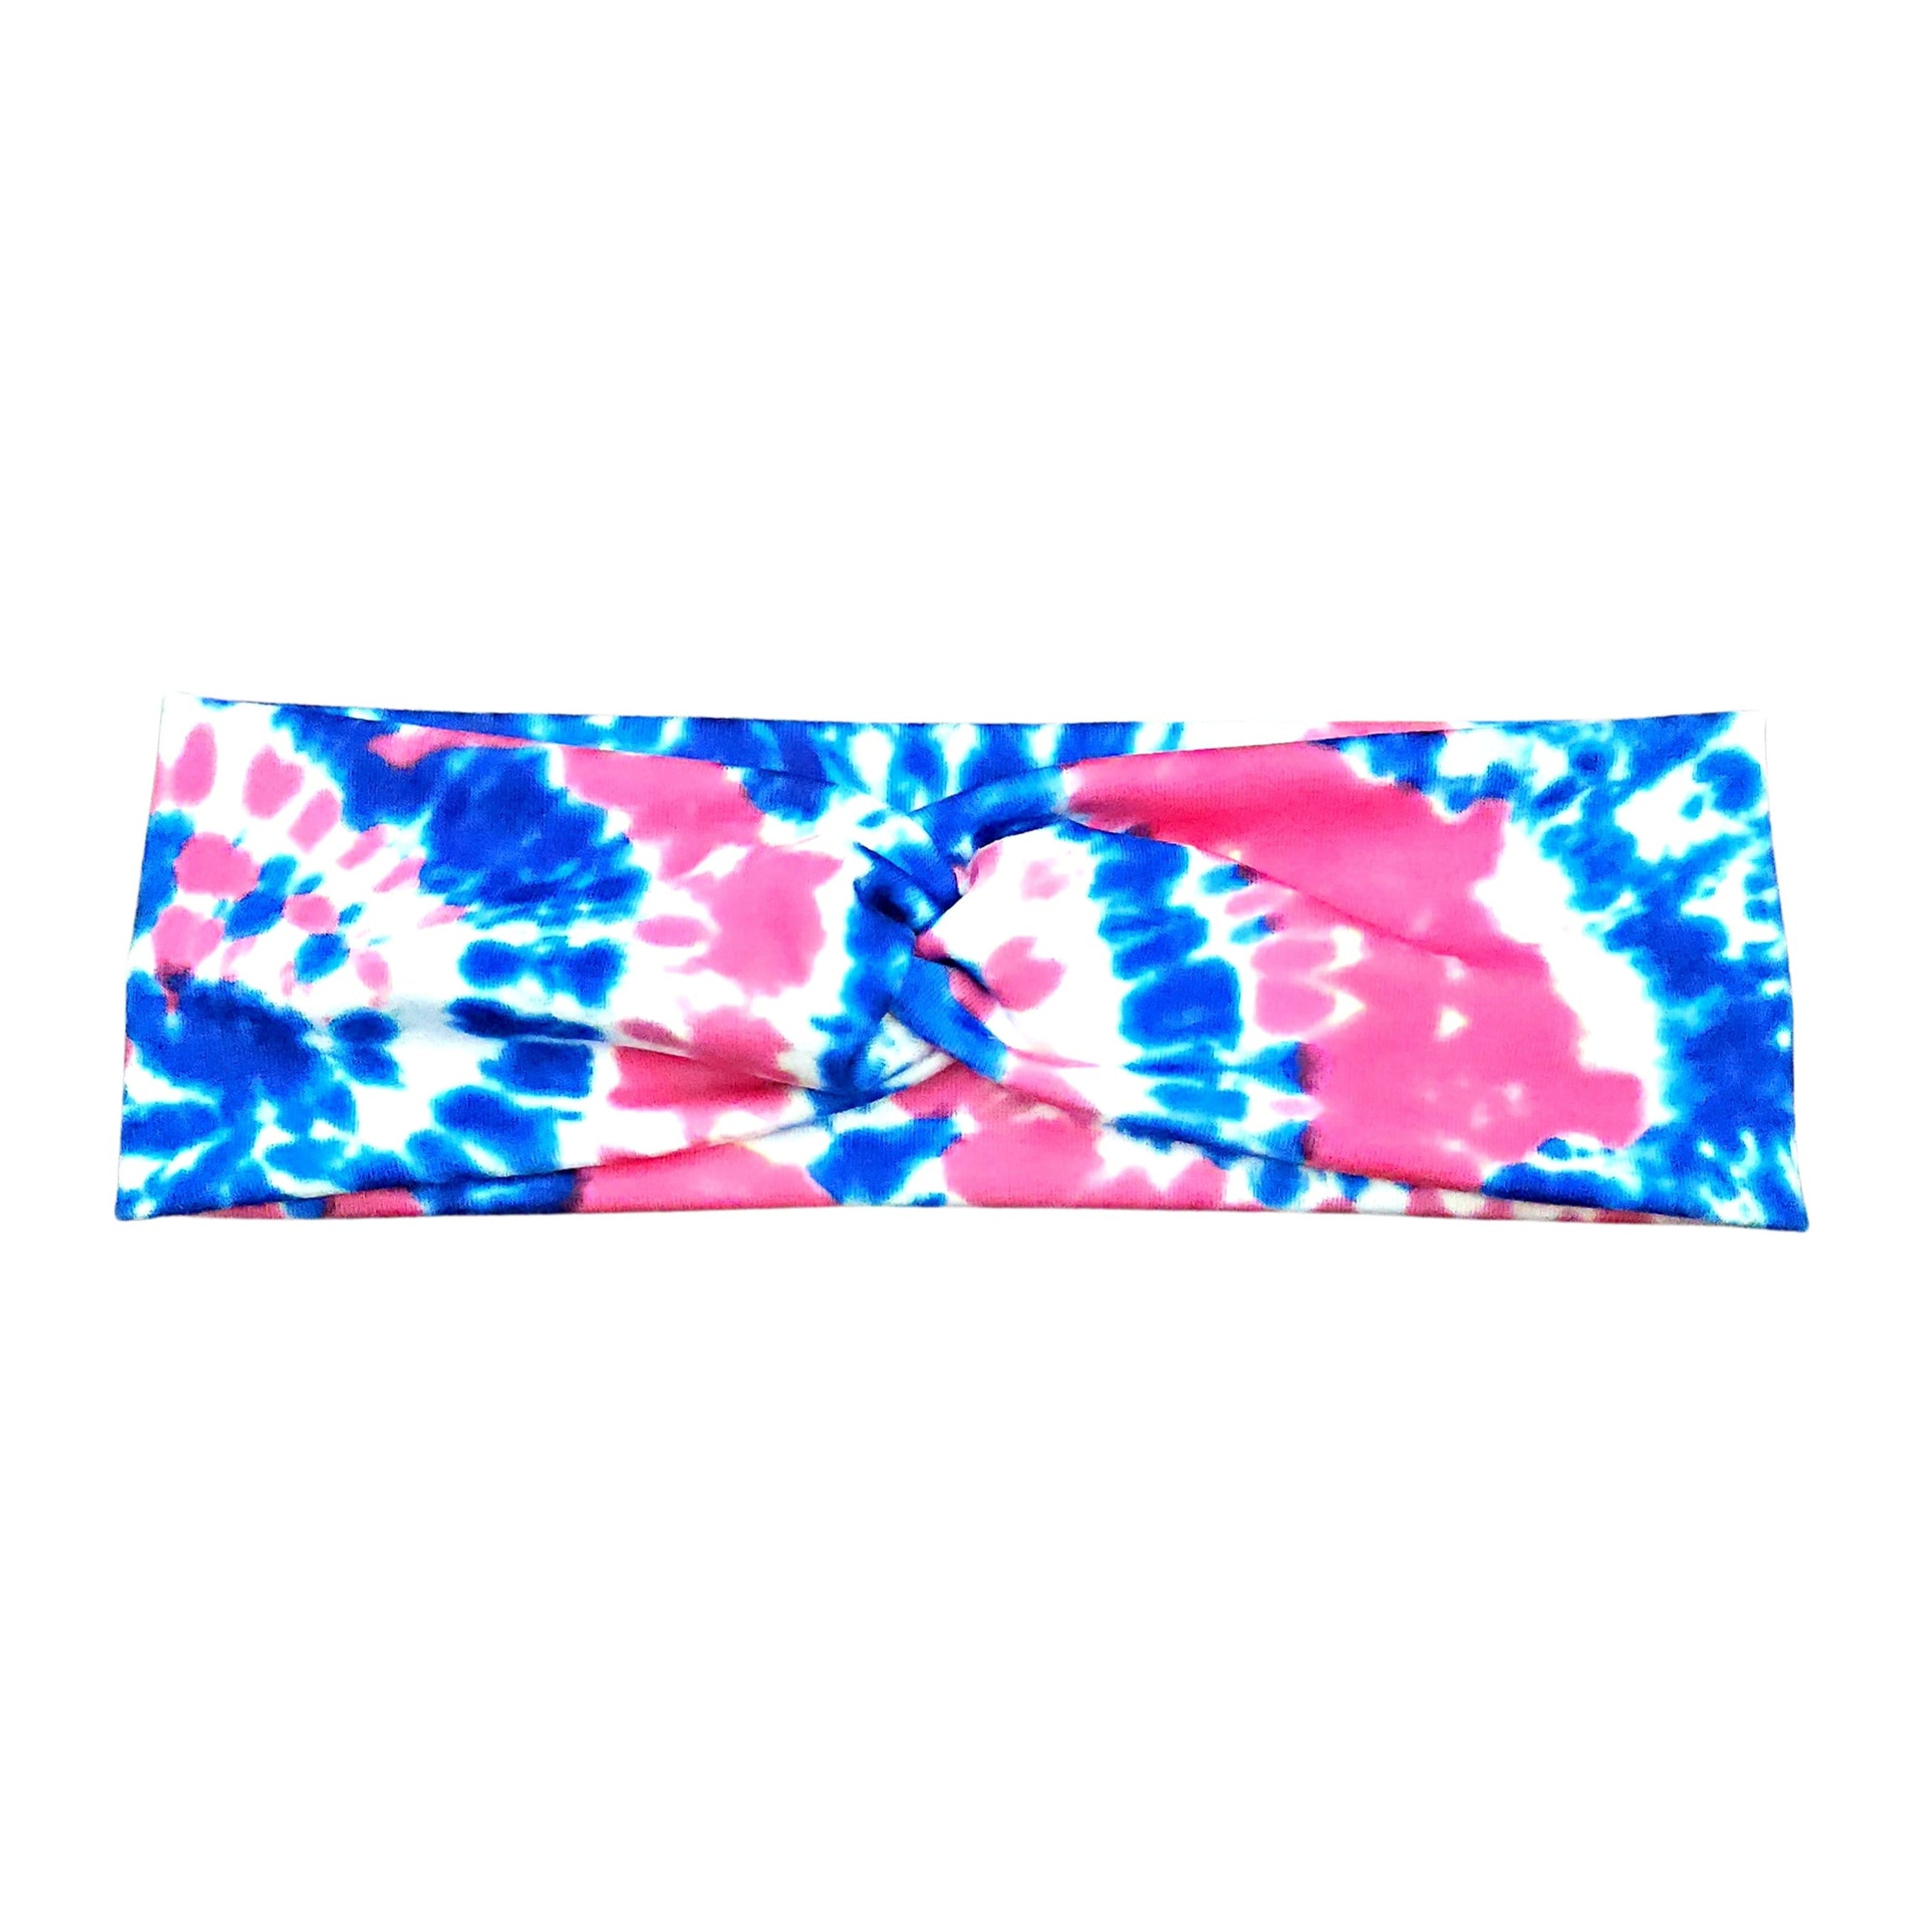 Pink and Blue Tie Dye Headband for Women